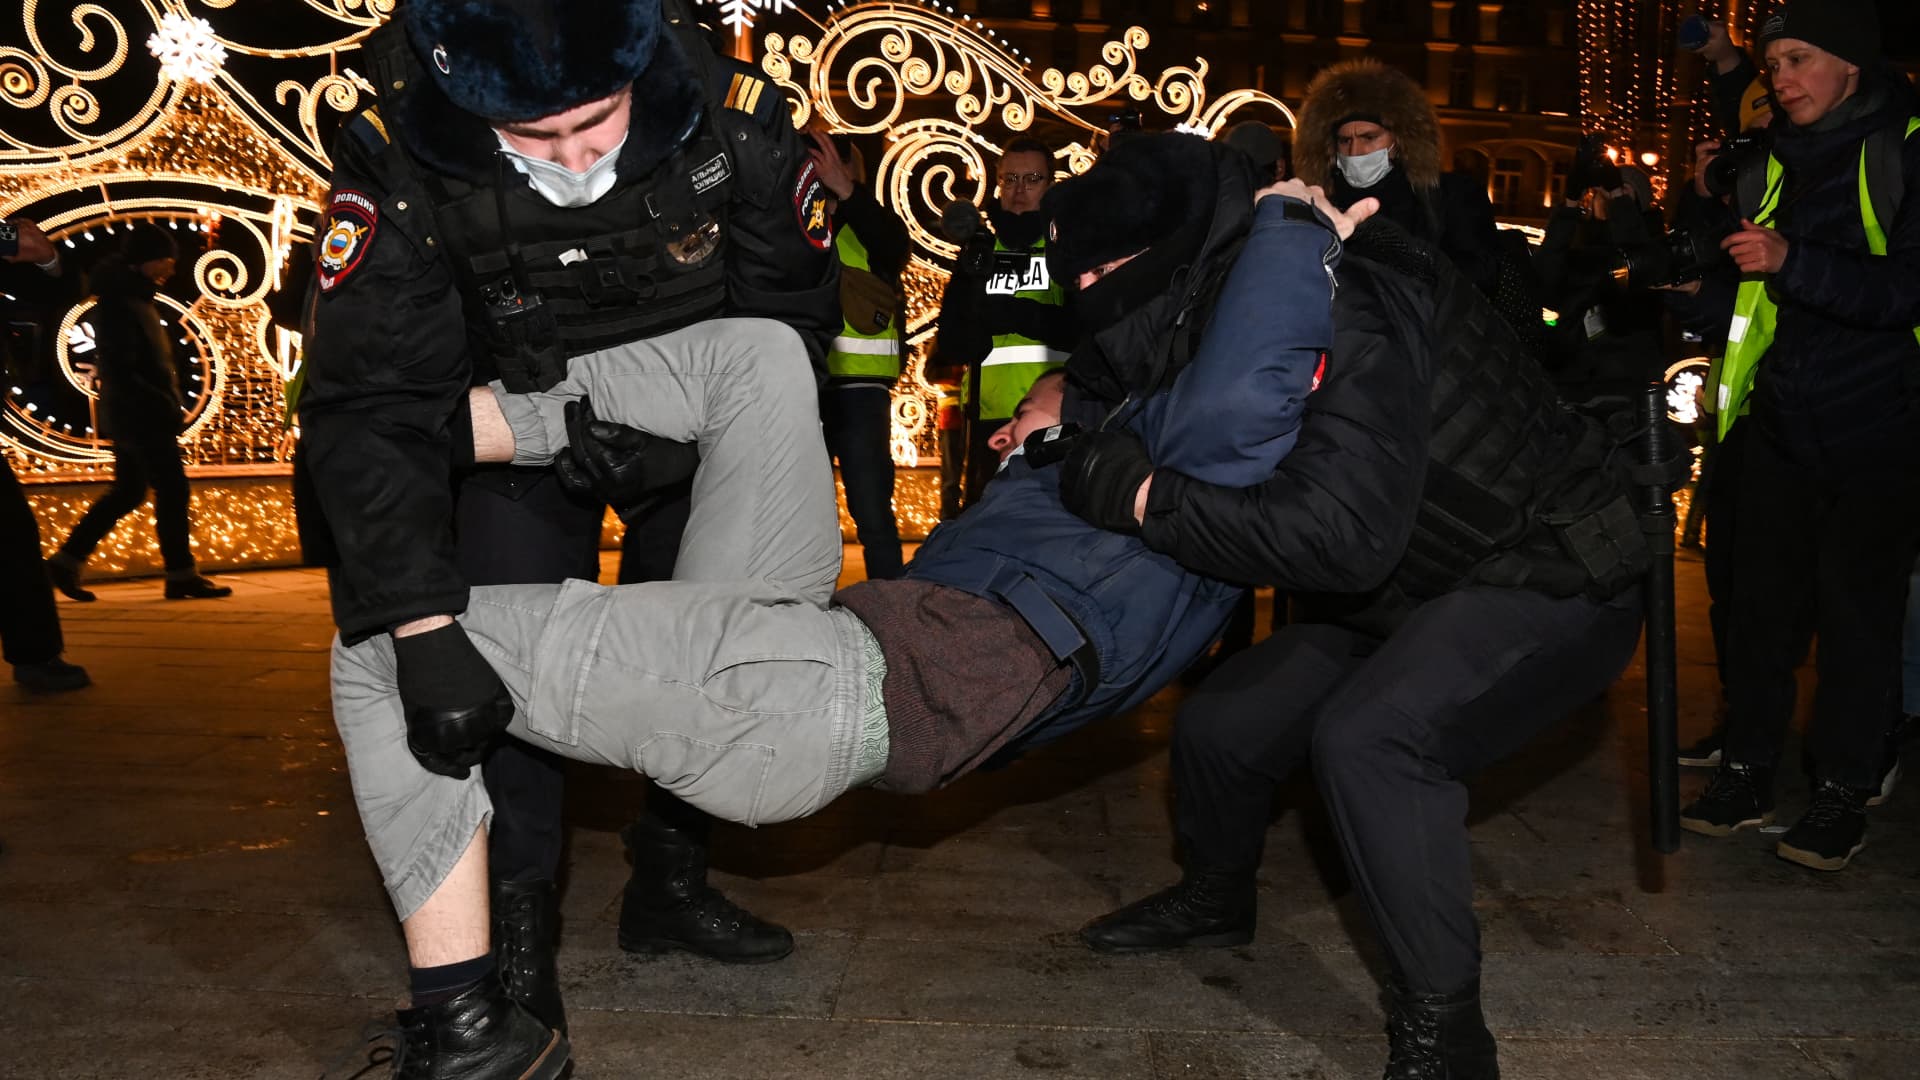 Police officers detain a man during a protest against Russia's invasion of Ukraine in Moscow on February 24, 2022.